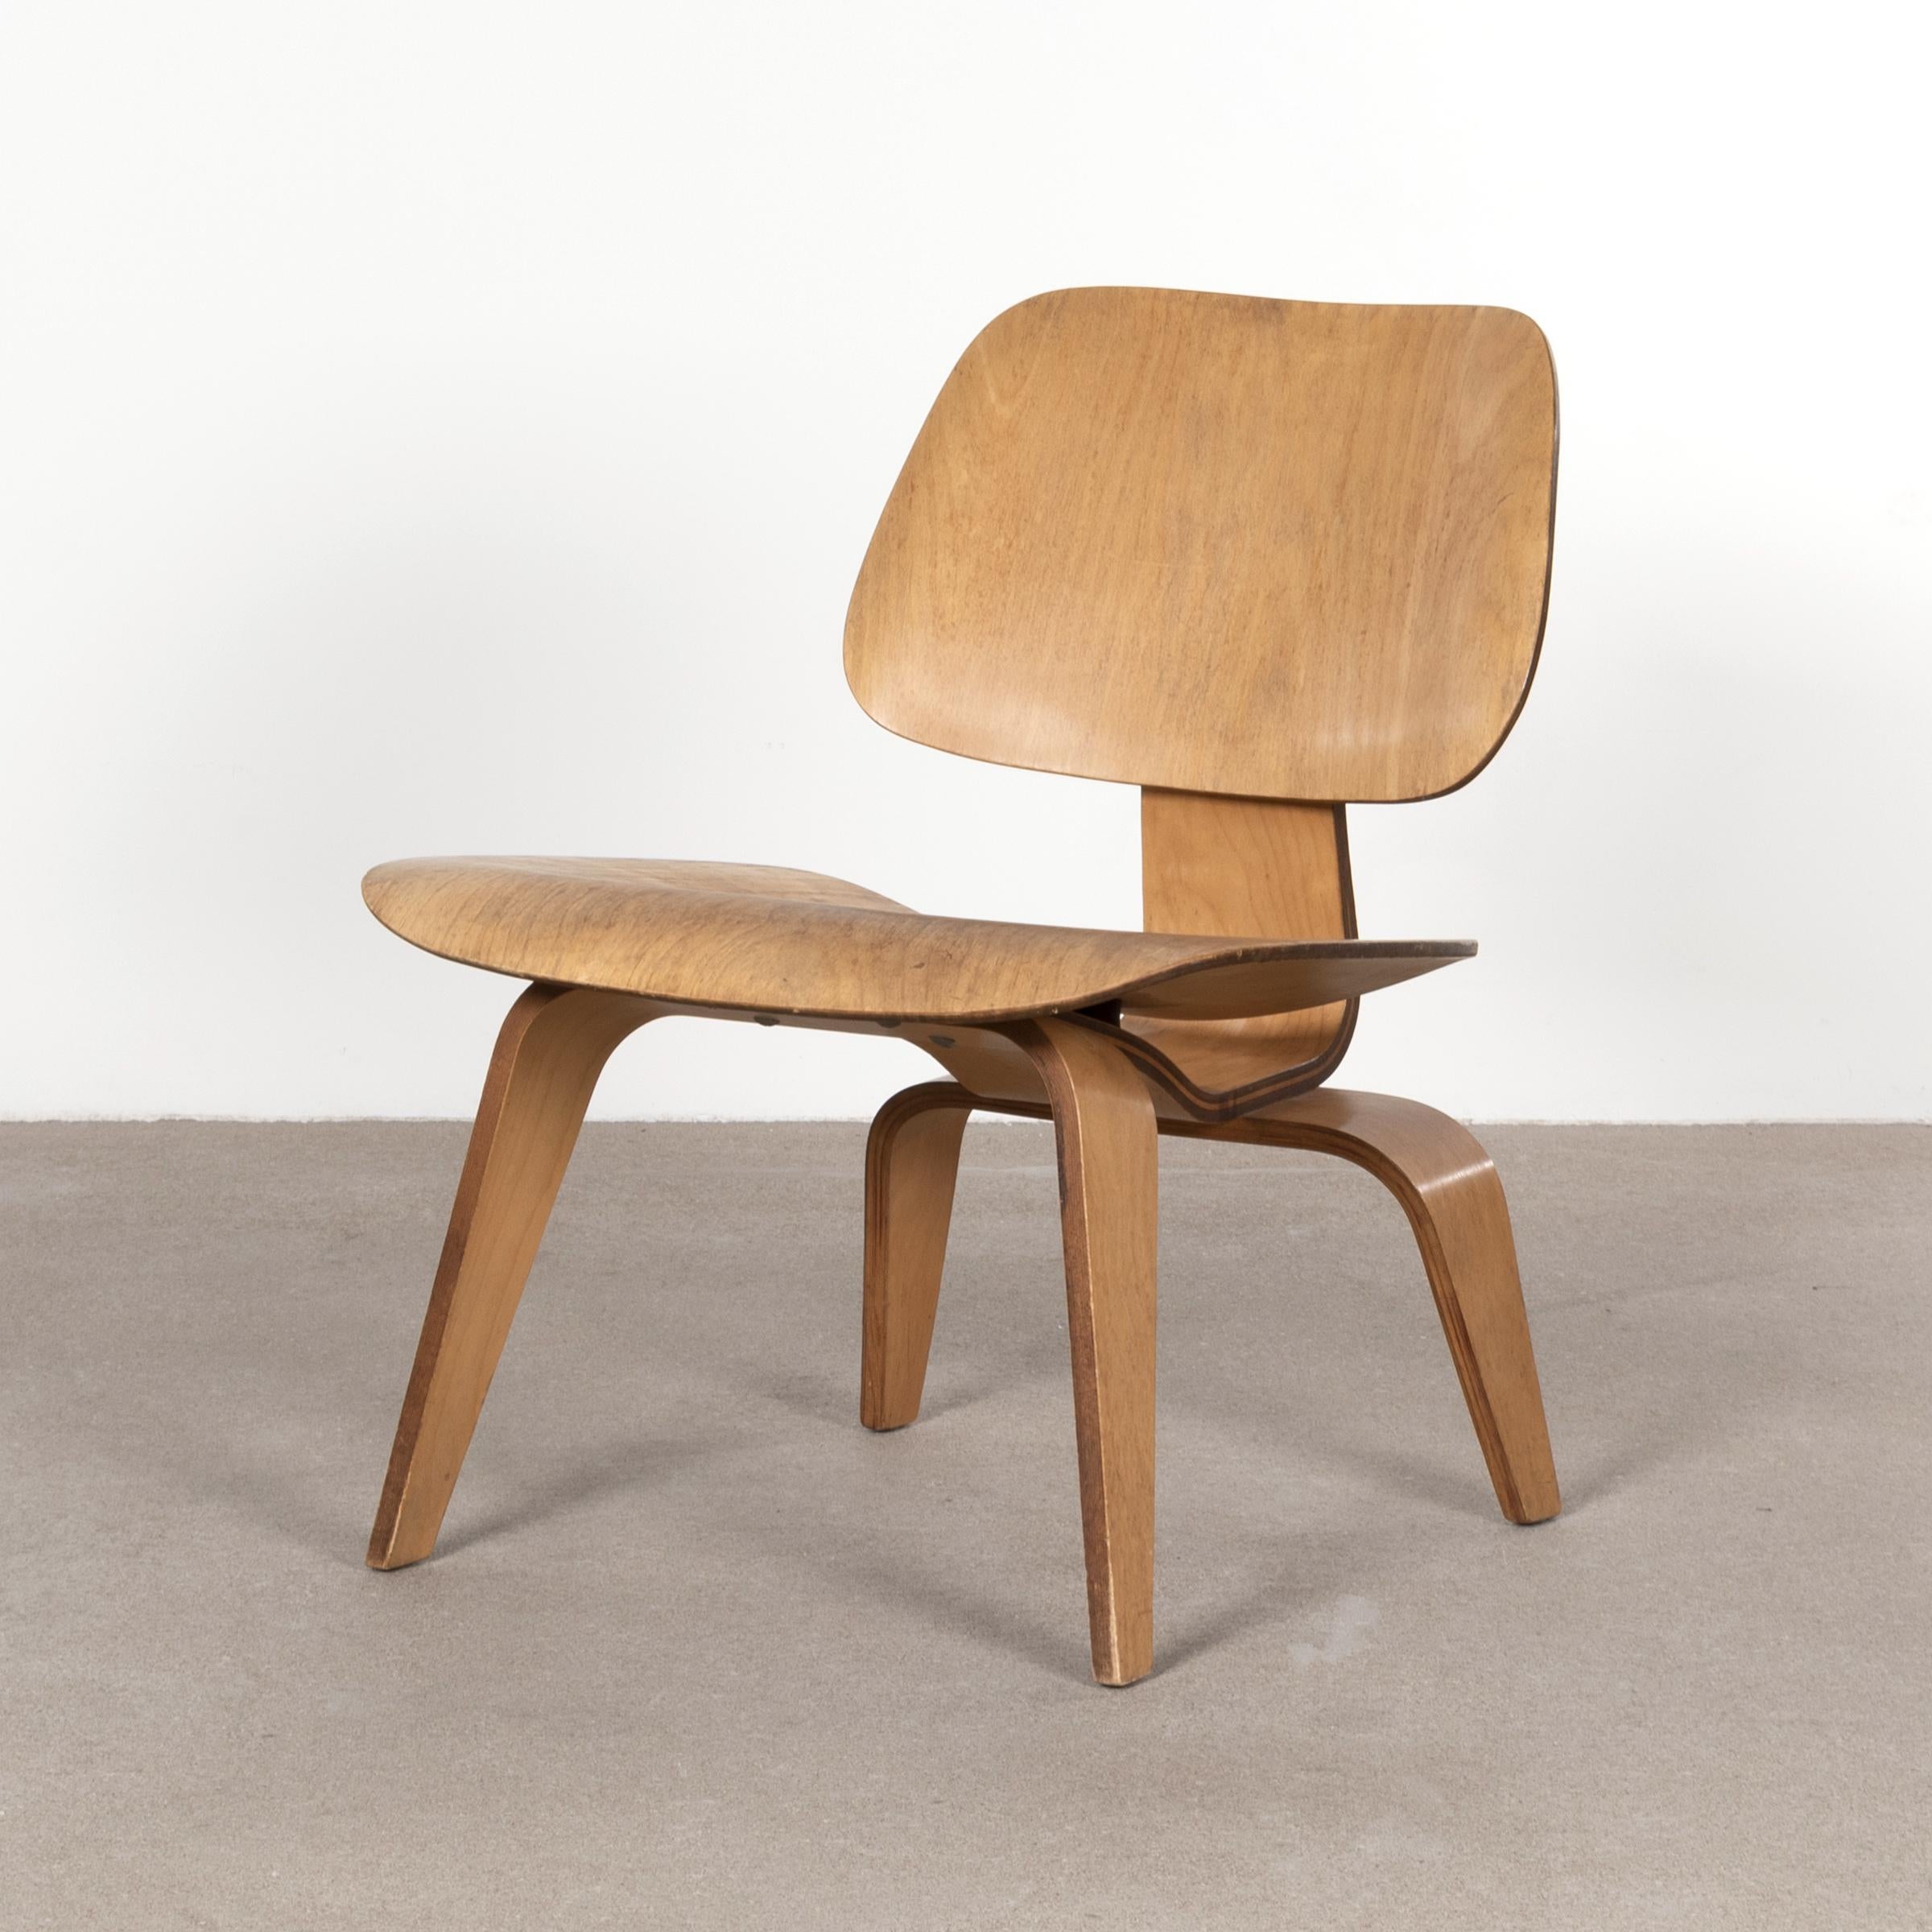 Mid-20th Century Eames LCW Maple Lounge Chair for Herman Miller